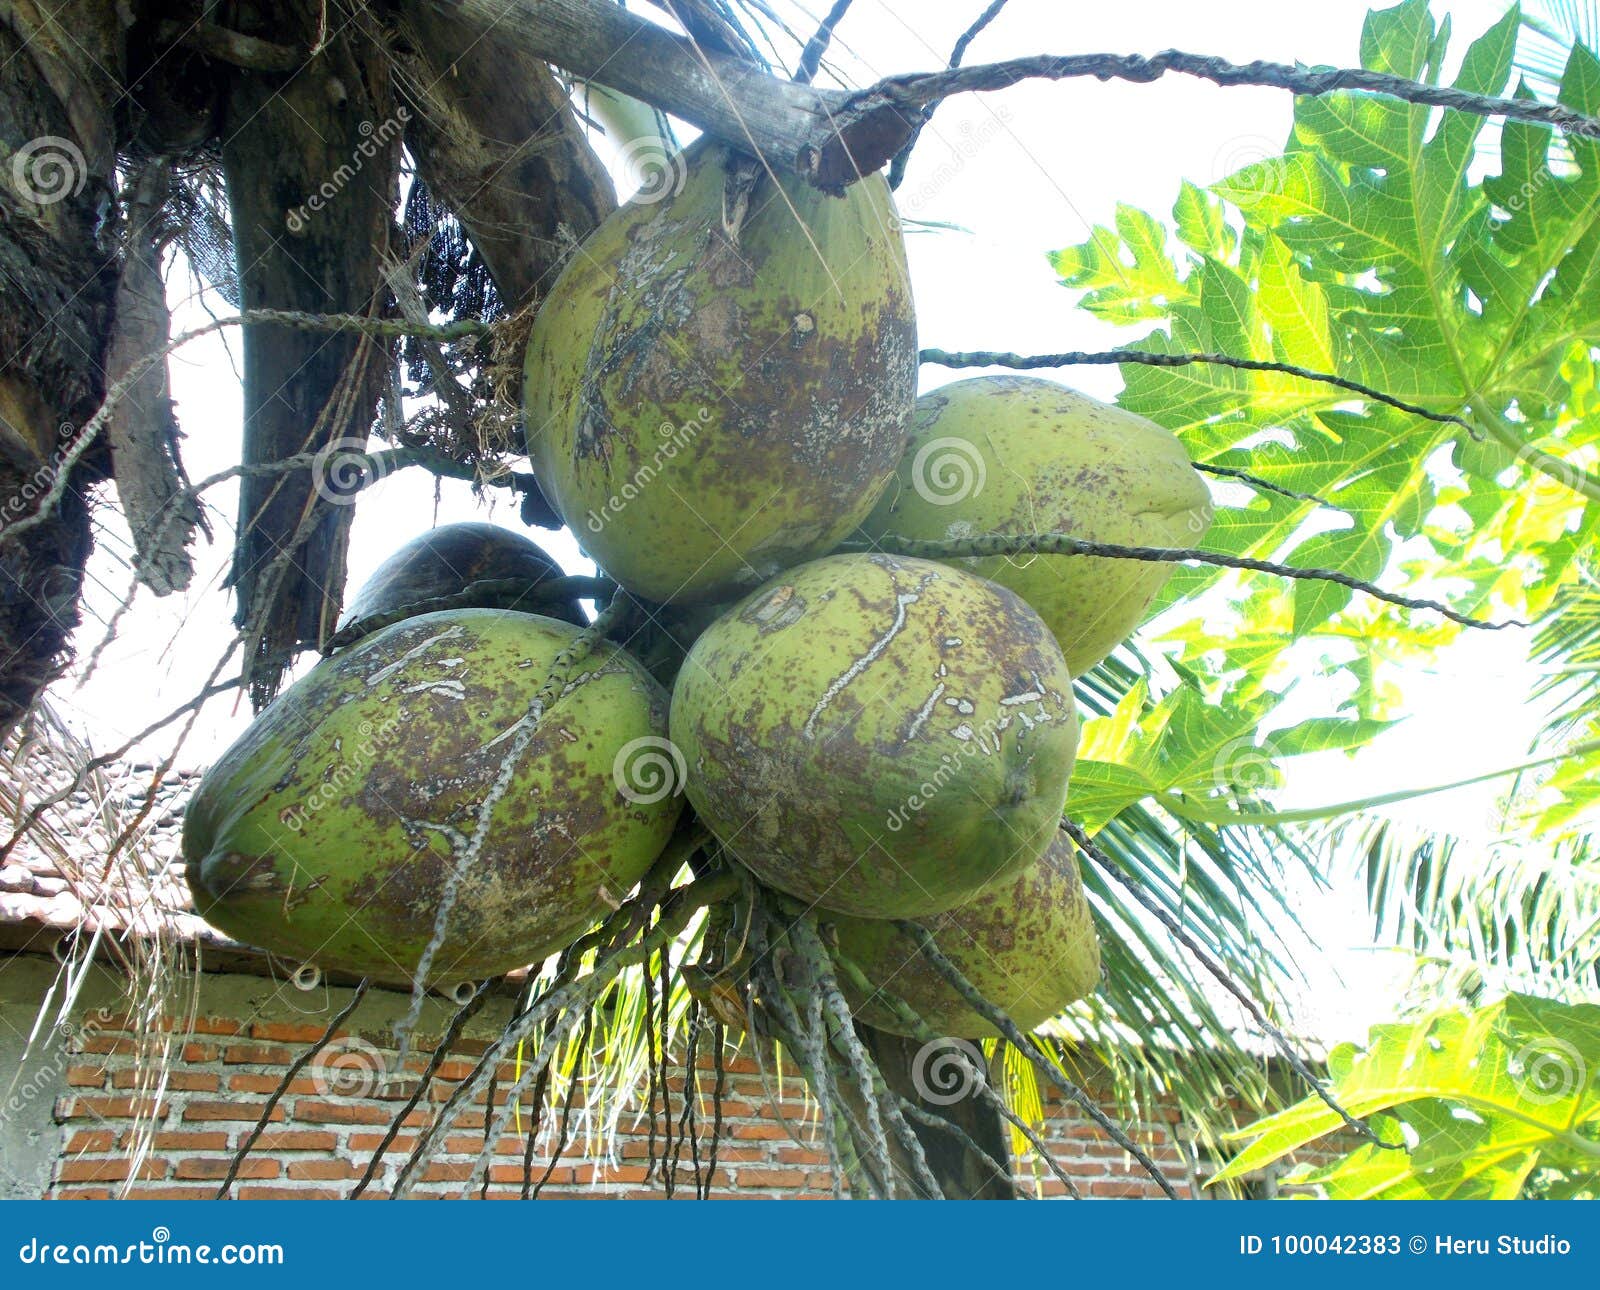 Green Coconut Tree and Fruits Stock Image - Image of healthcare, group ...